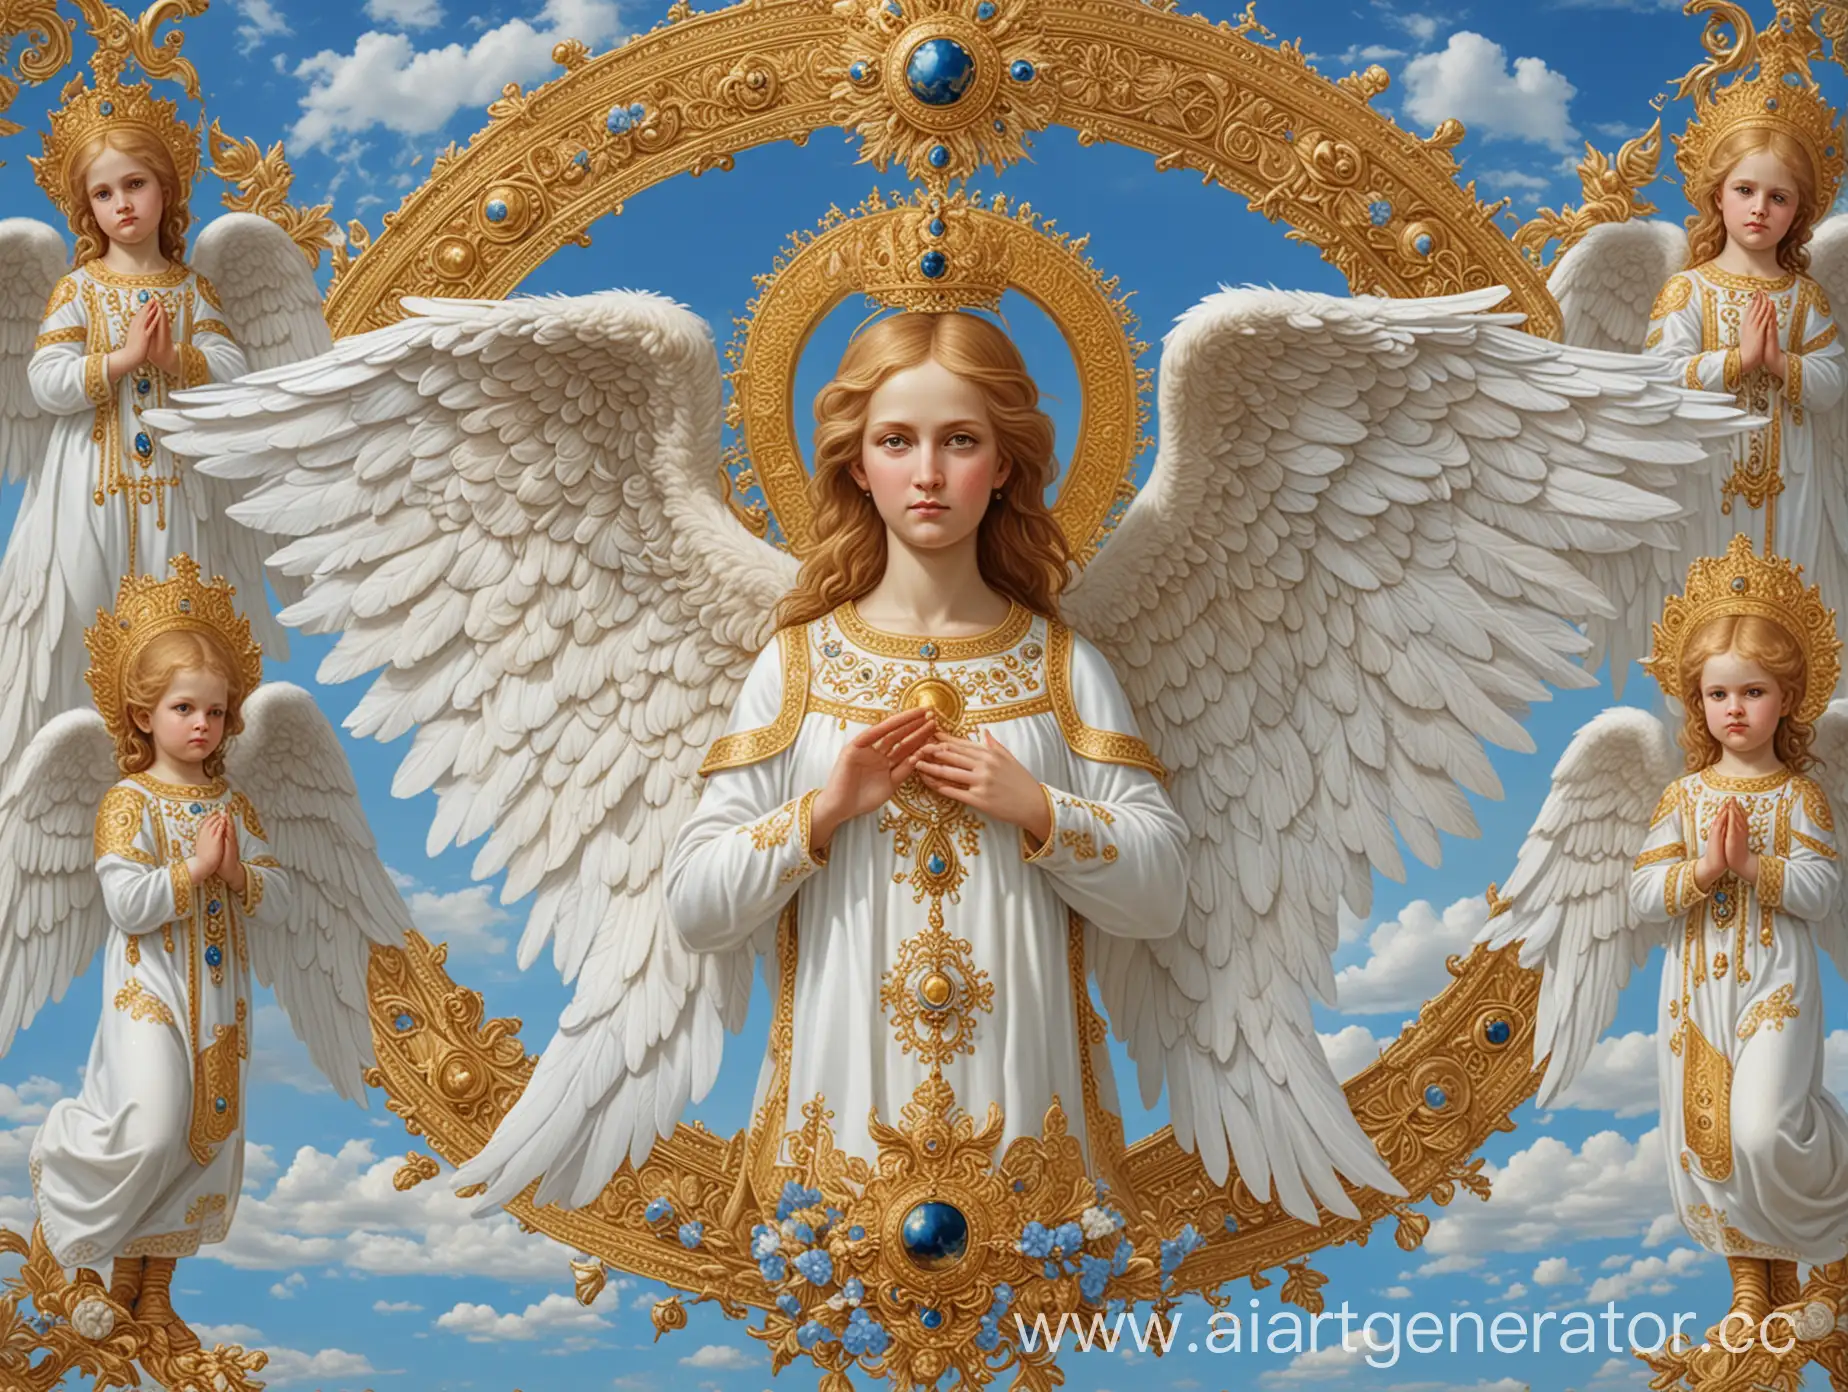 Seraphim-Angels-and-Romanov-Royalty-in-Golden-Ambiance